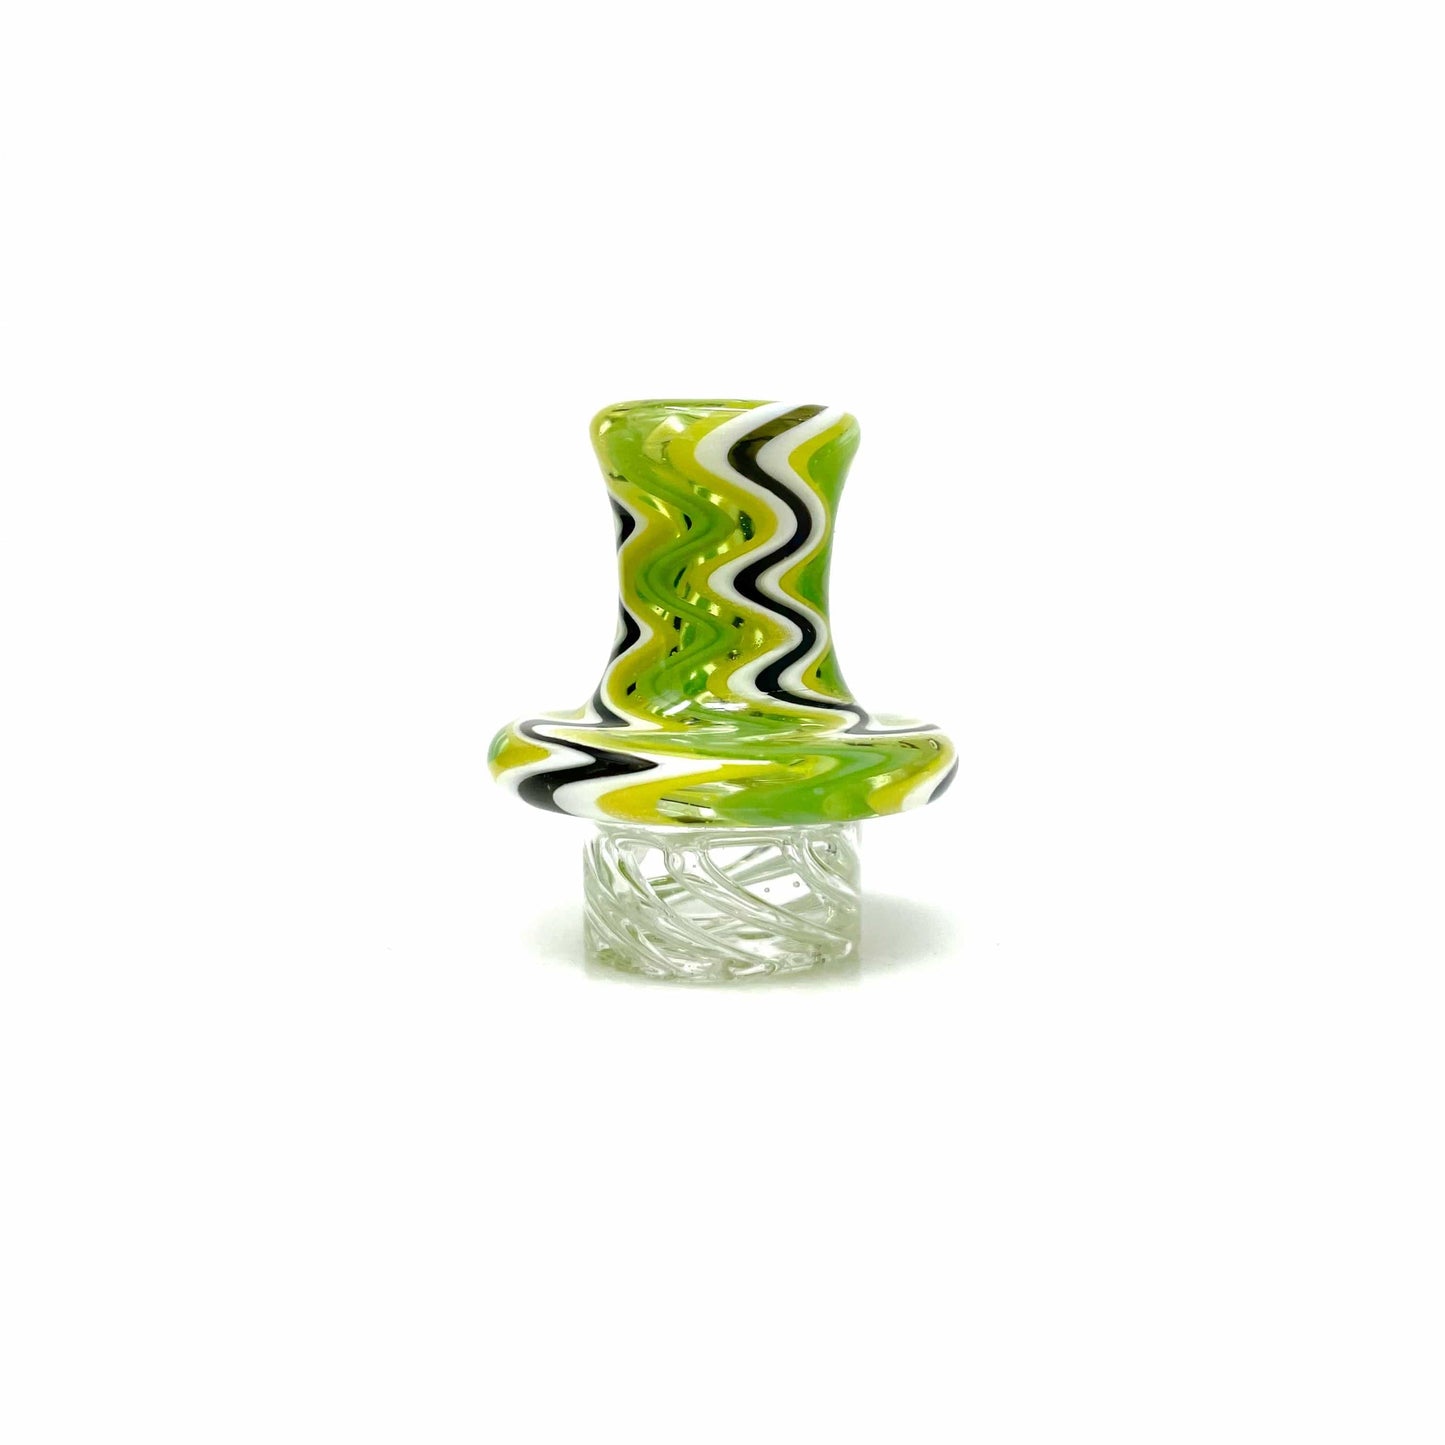 AFM Smoke Carb Cap Greens Turbo Reversal Glass Spinner Carb Cap + 2 Pearls